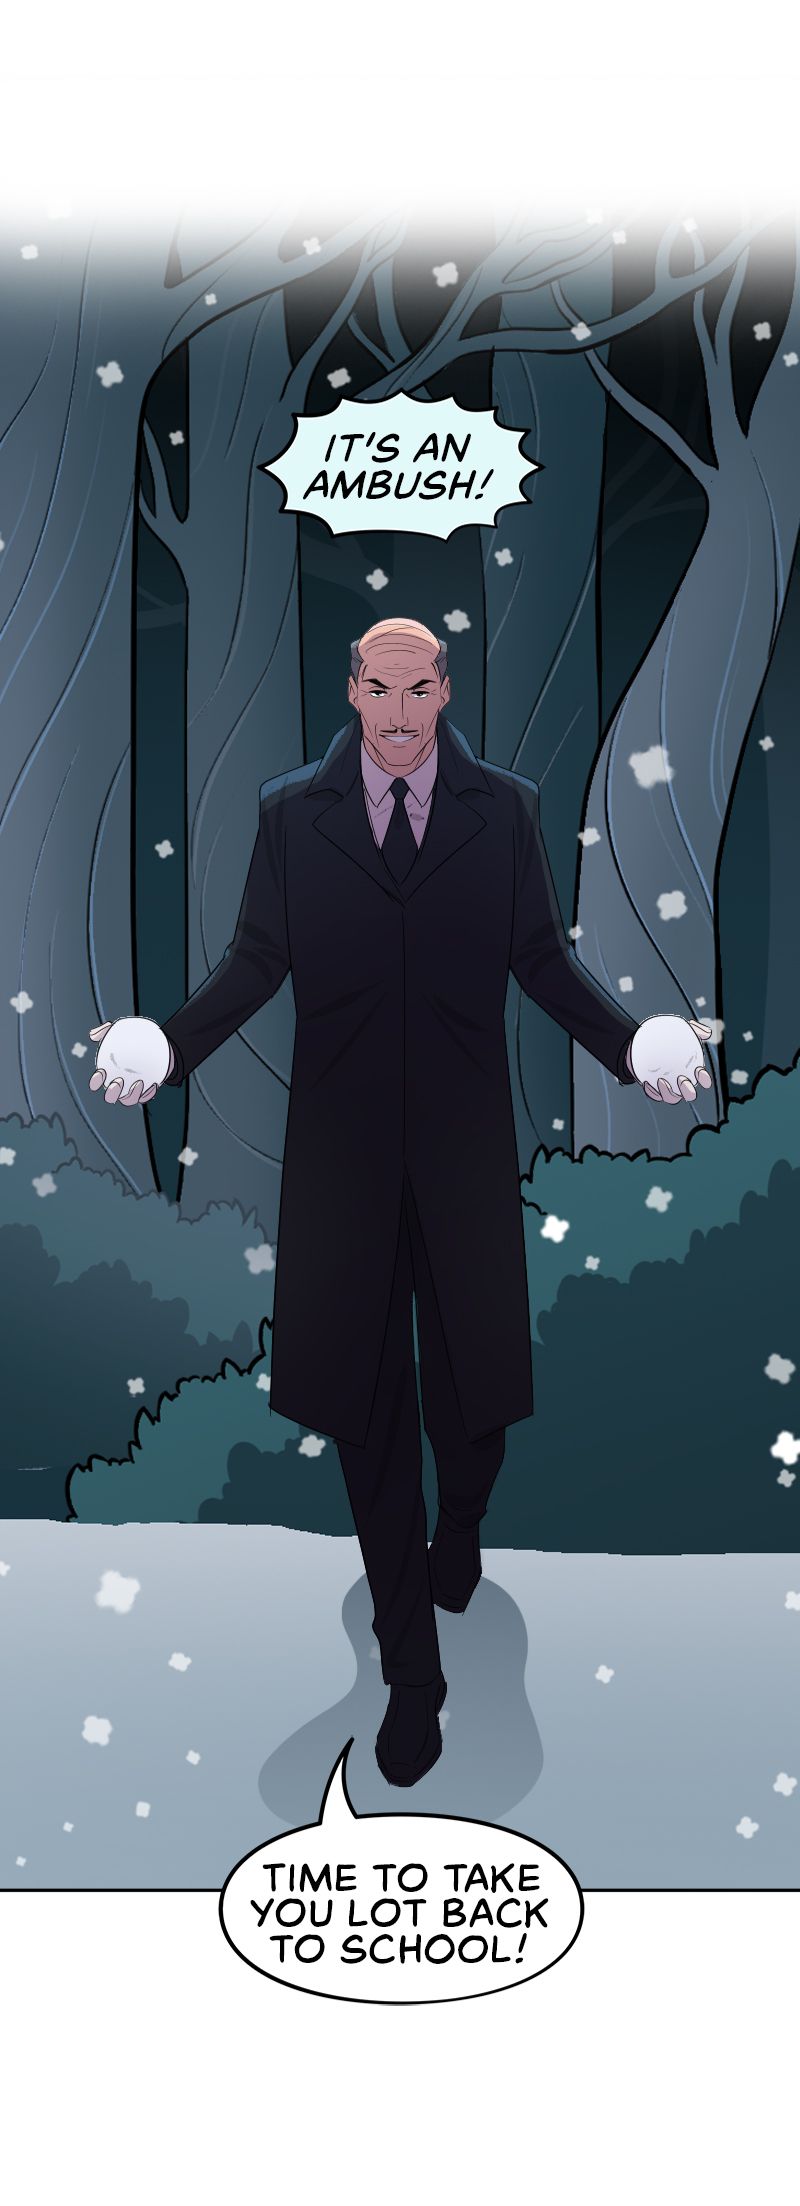 “It’s an ambush!” someone cries as Alfred steps out of the woods with two snowballs, saying “Time to take you lot back to school!” in Batman: Wayne Family Adventures.